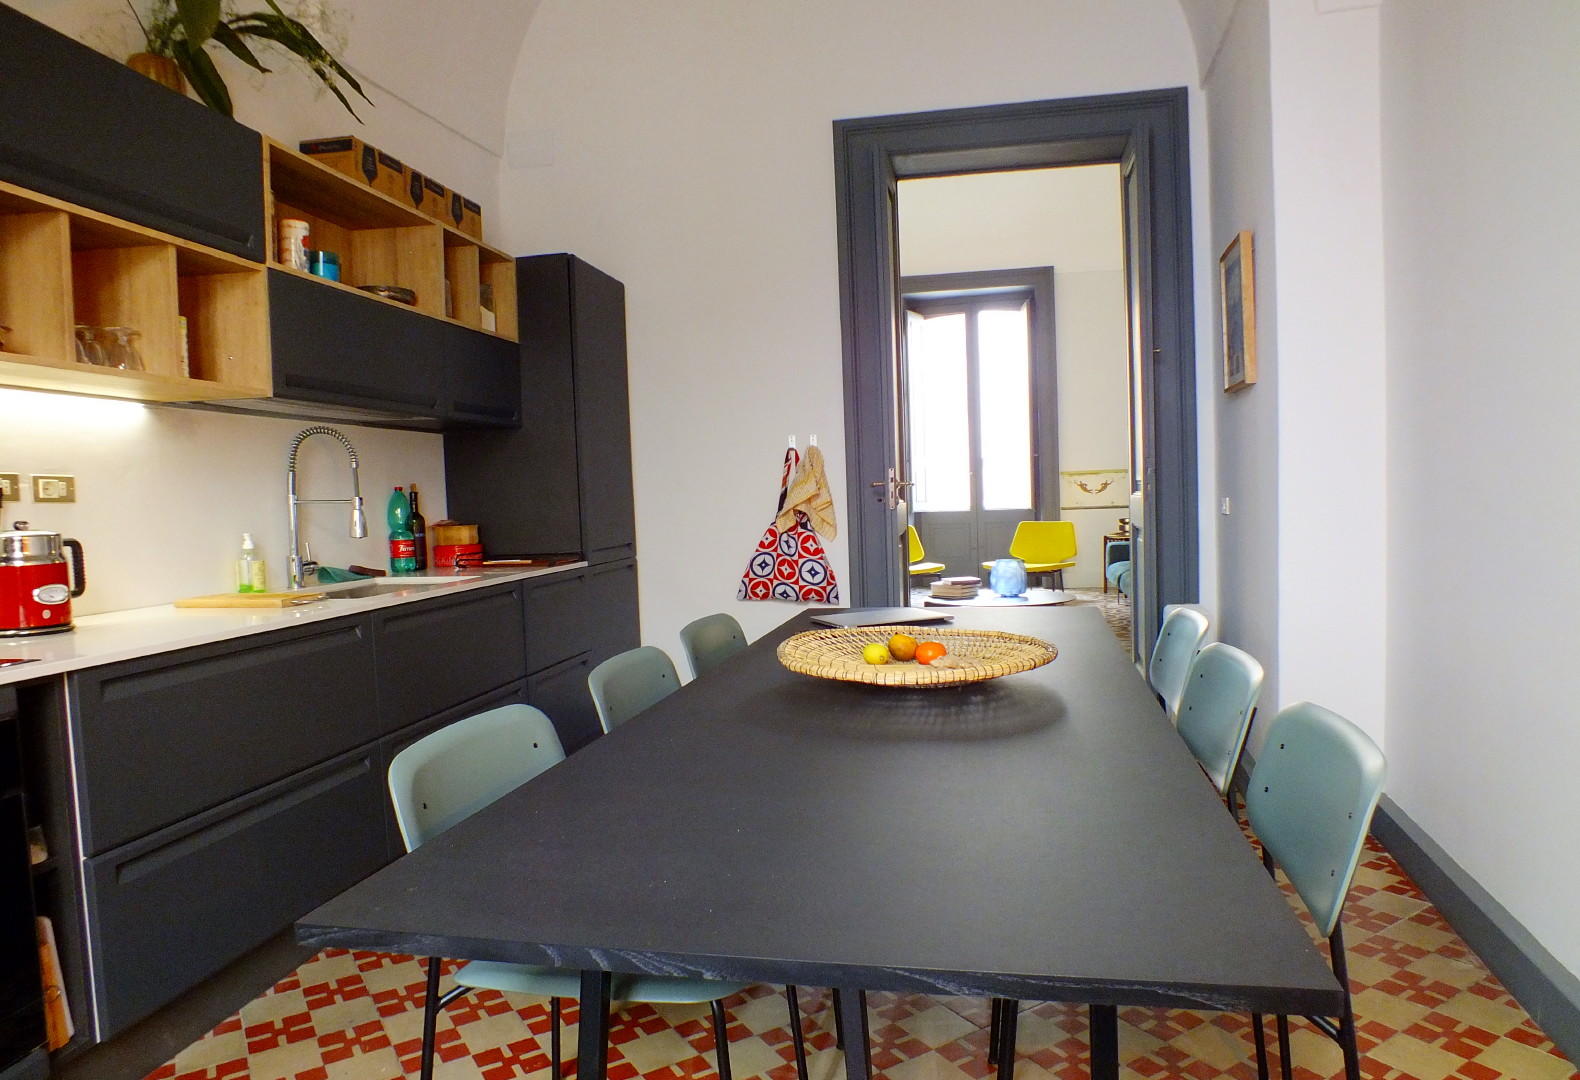 First floor - Kitchen & dining table